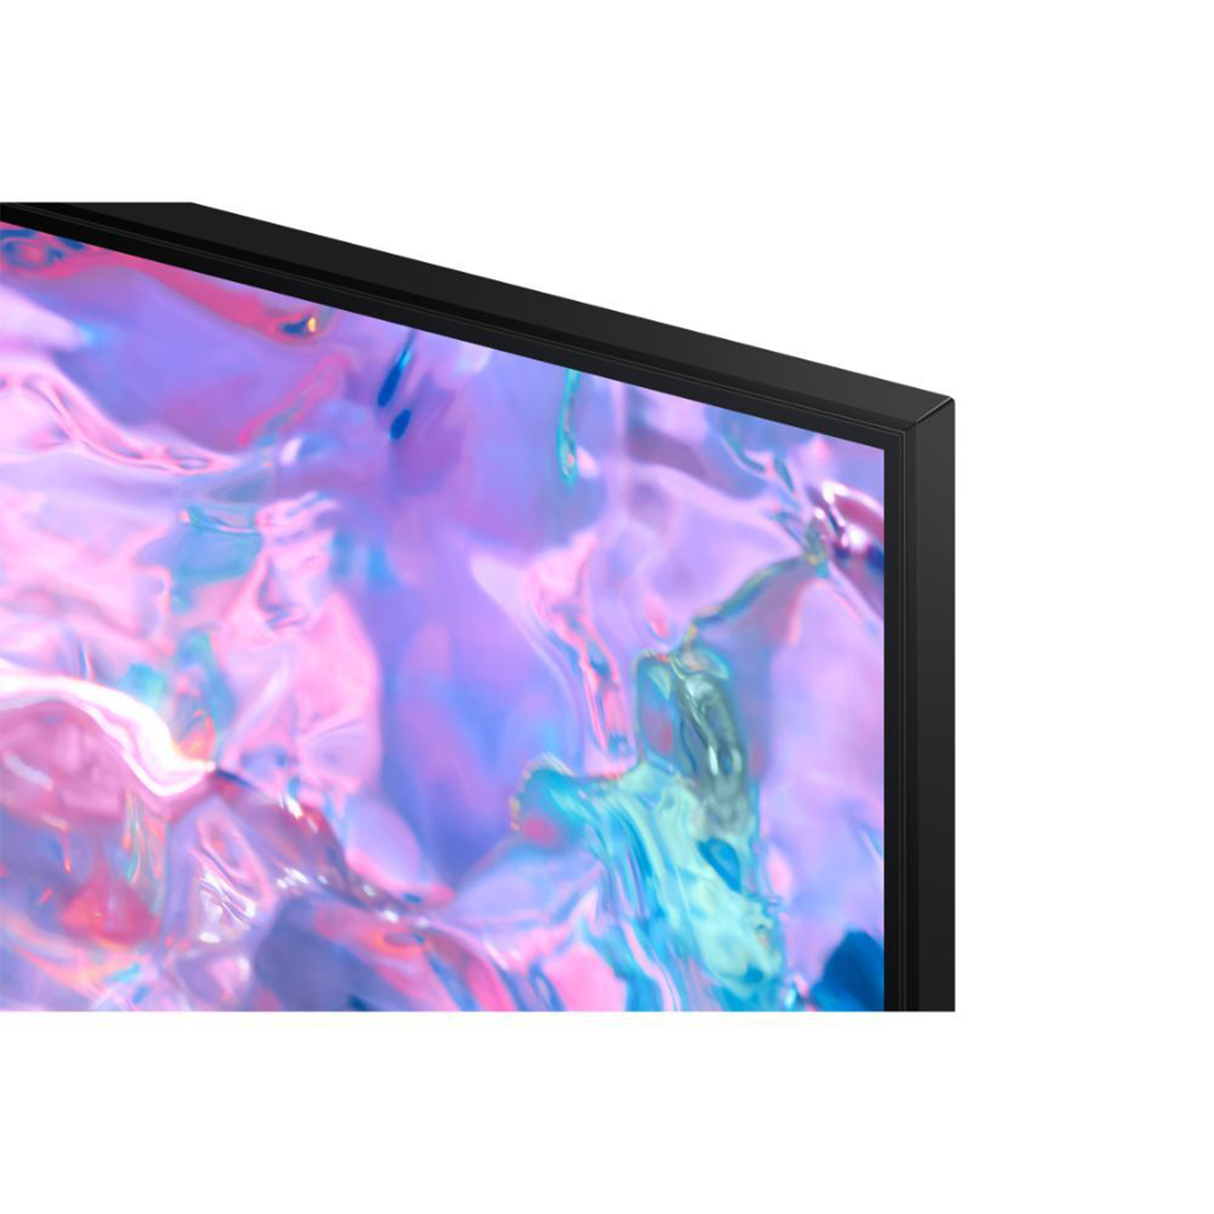 Upgrade home with Samsung's 55" UHD Smart LED TV 55CU7700 – epitome of modern TV tech.